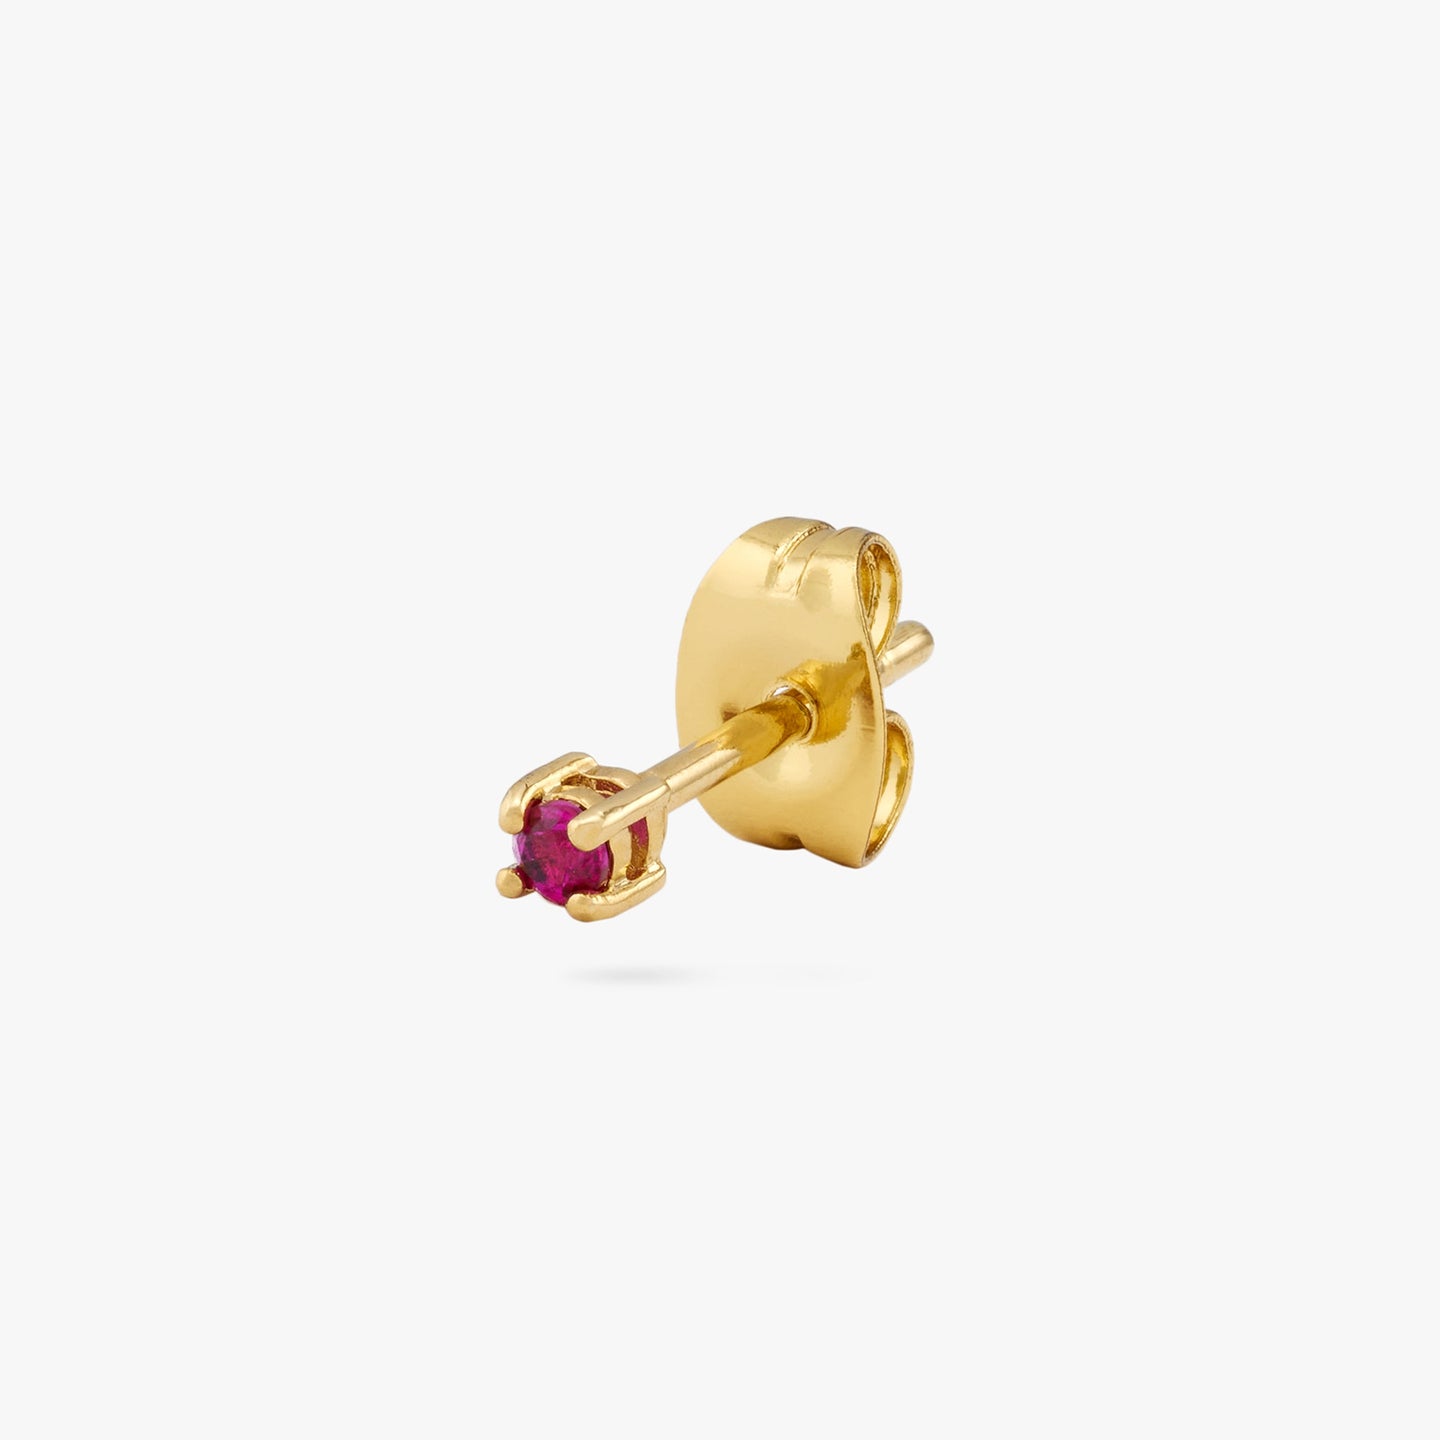 A mini gold stud with a pink cz gem color:null|gold/pink